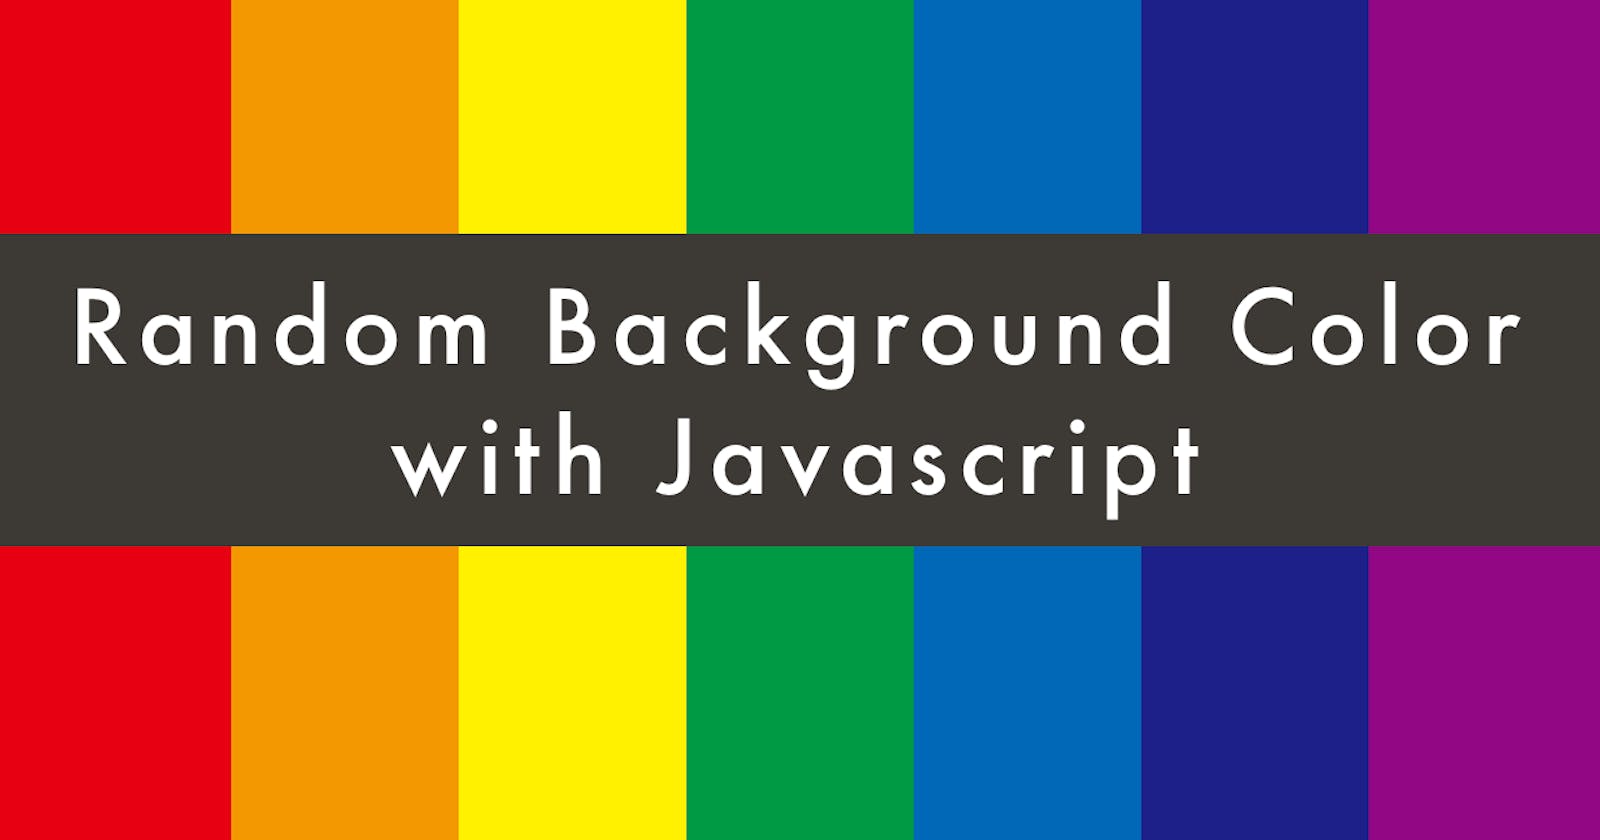 Random Background Color Generator. Javascript Project For Absolute Beginners.